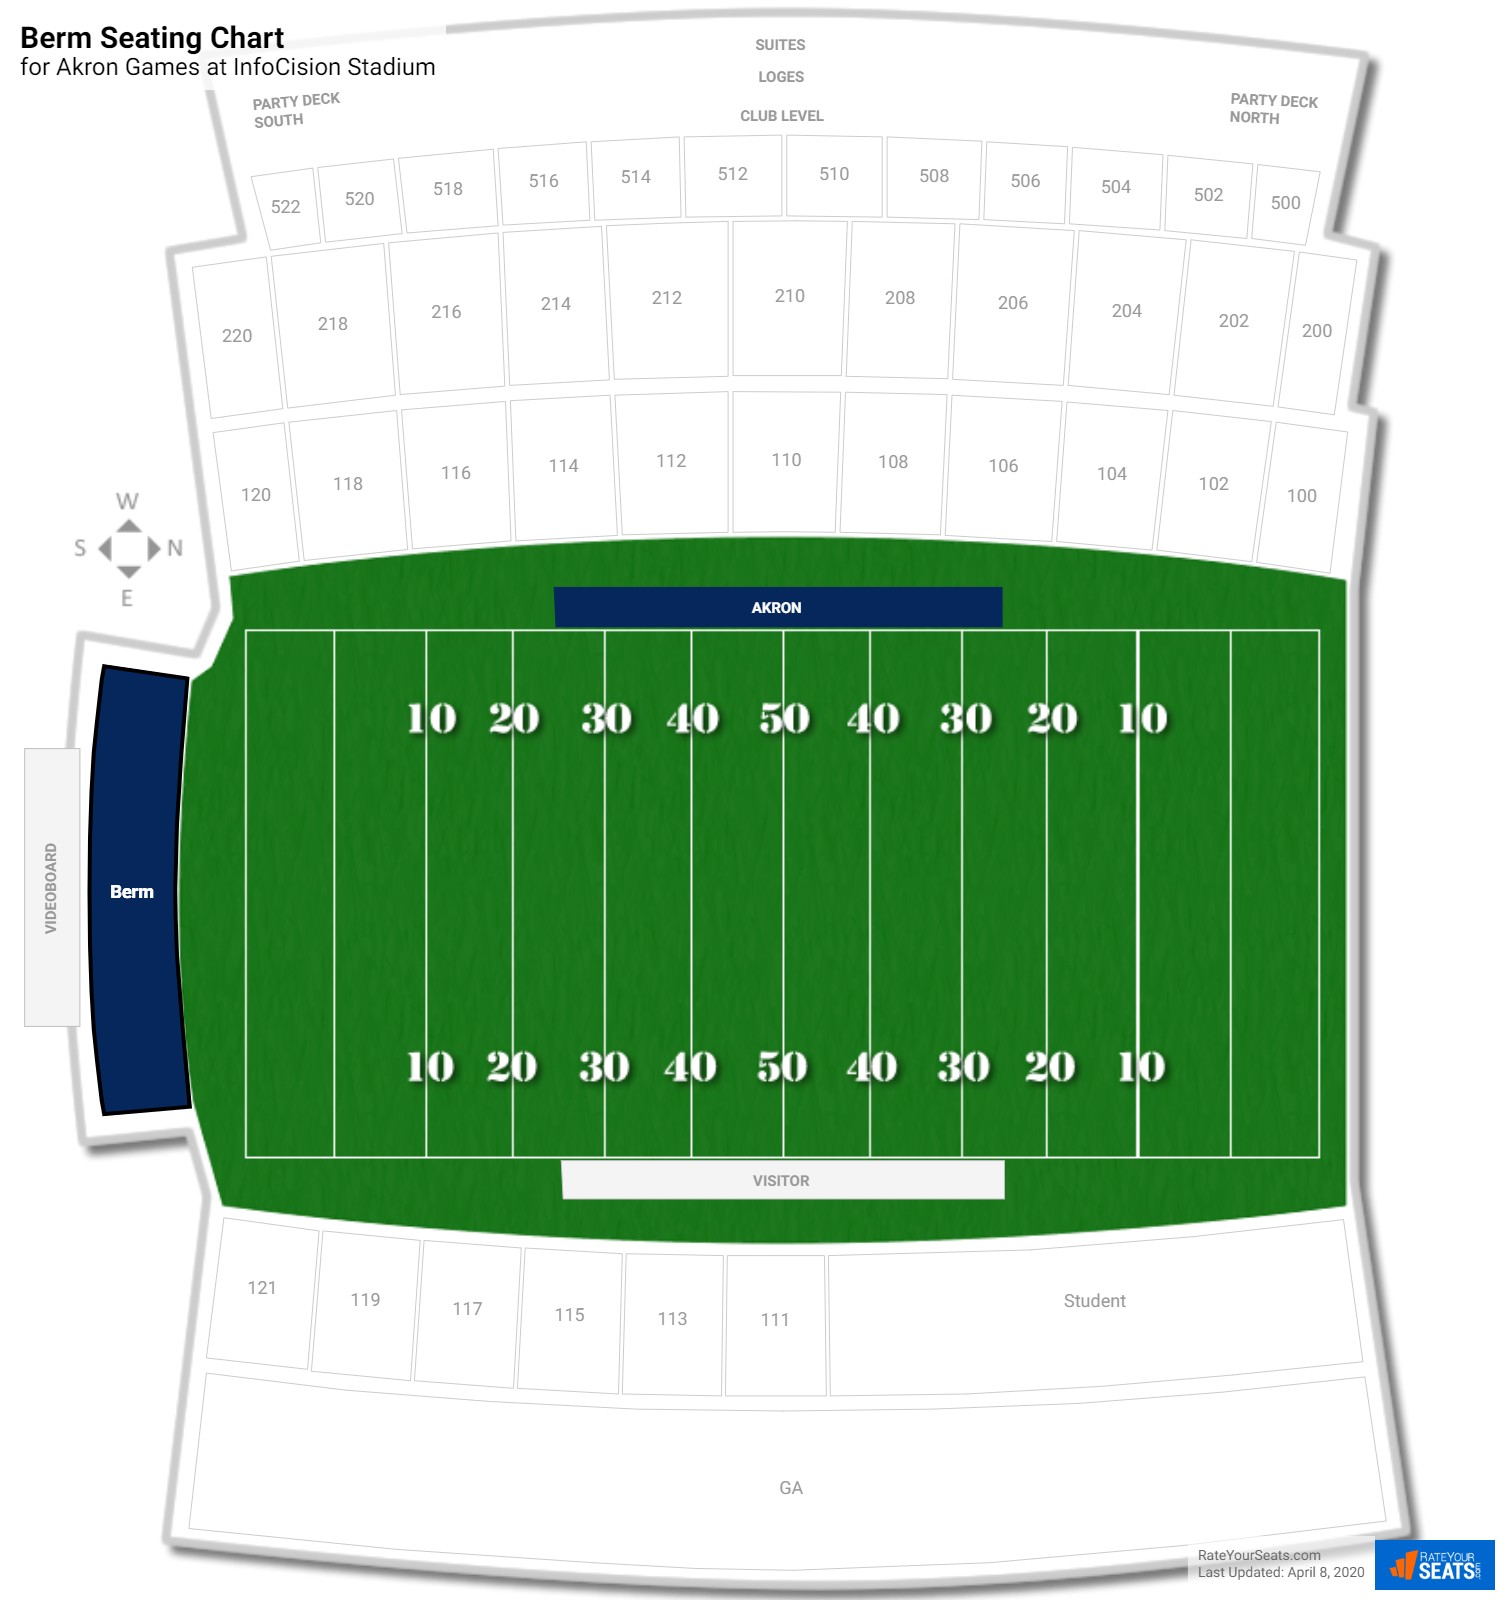 InfoCision Stadium (Akron) Seating Guide - RateYourSeats.com